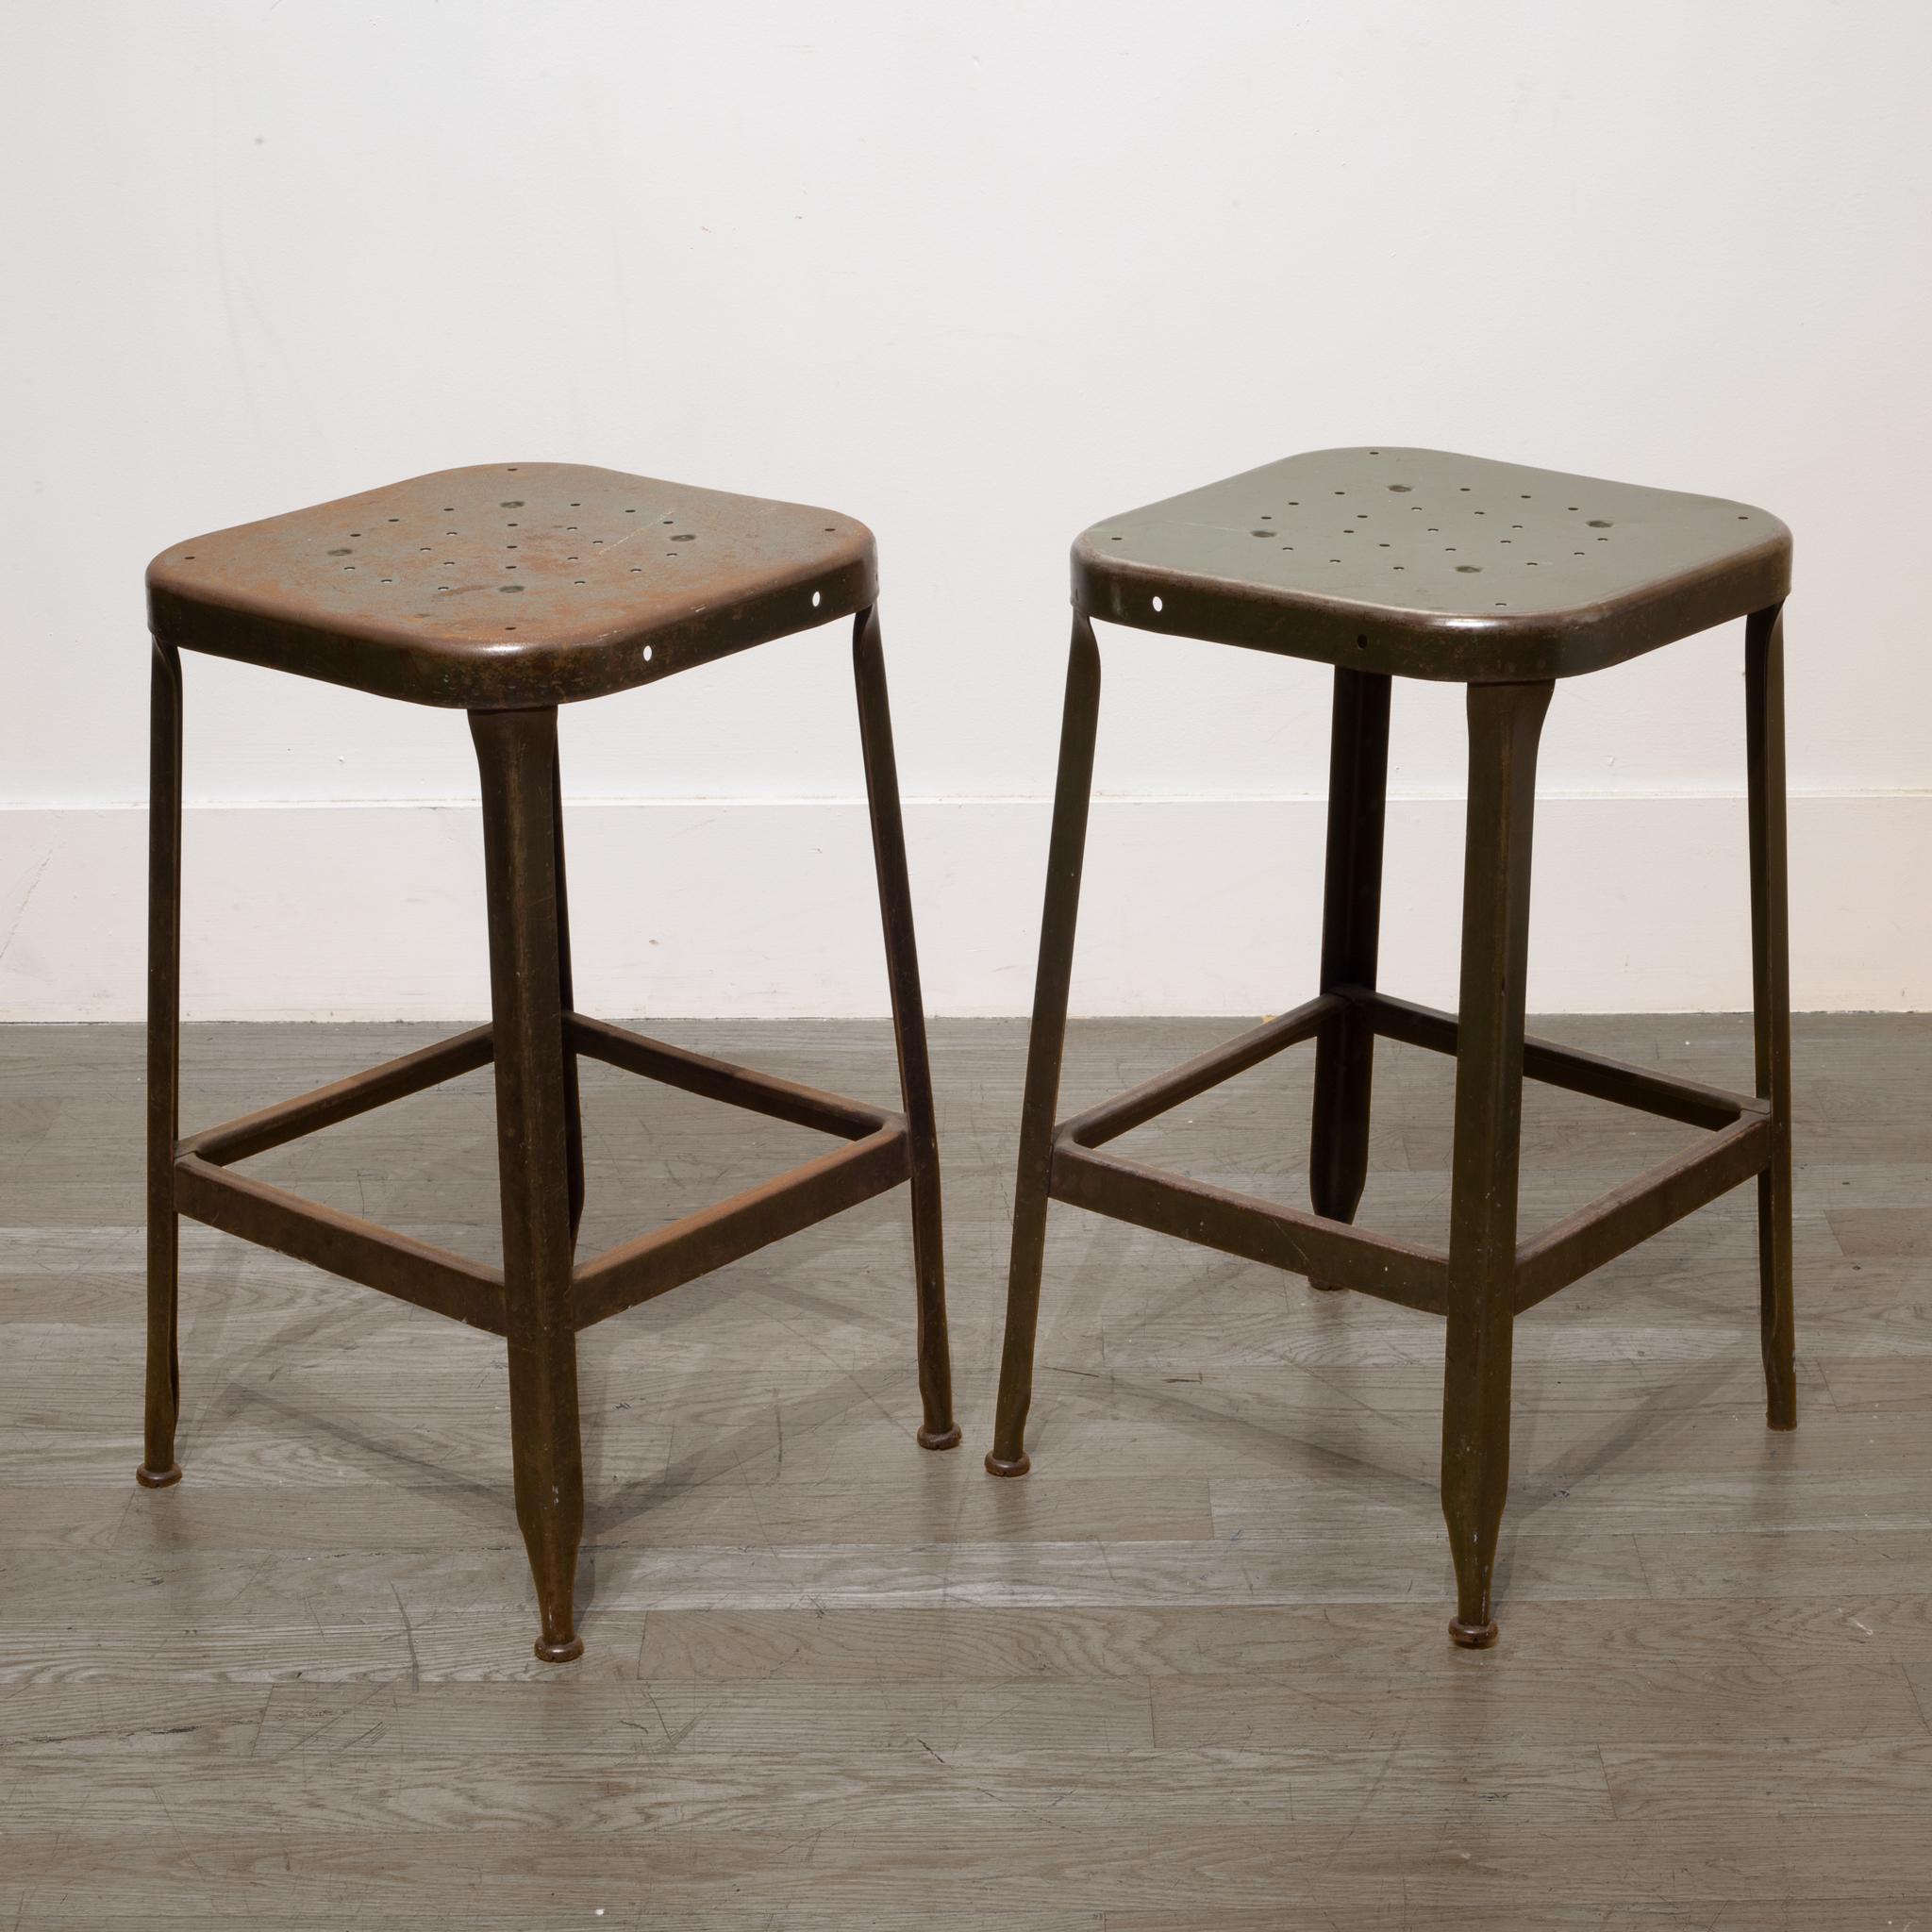 20th Century Pressed and Folded Steel Factory Stools, circa 1950